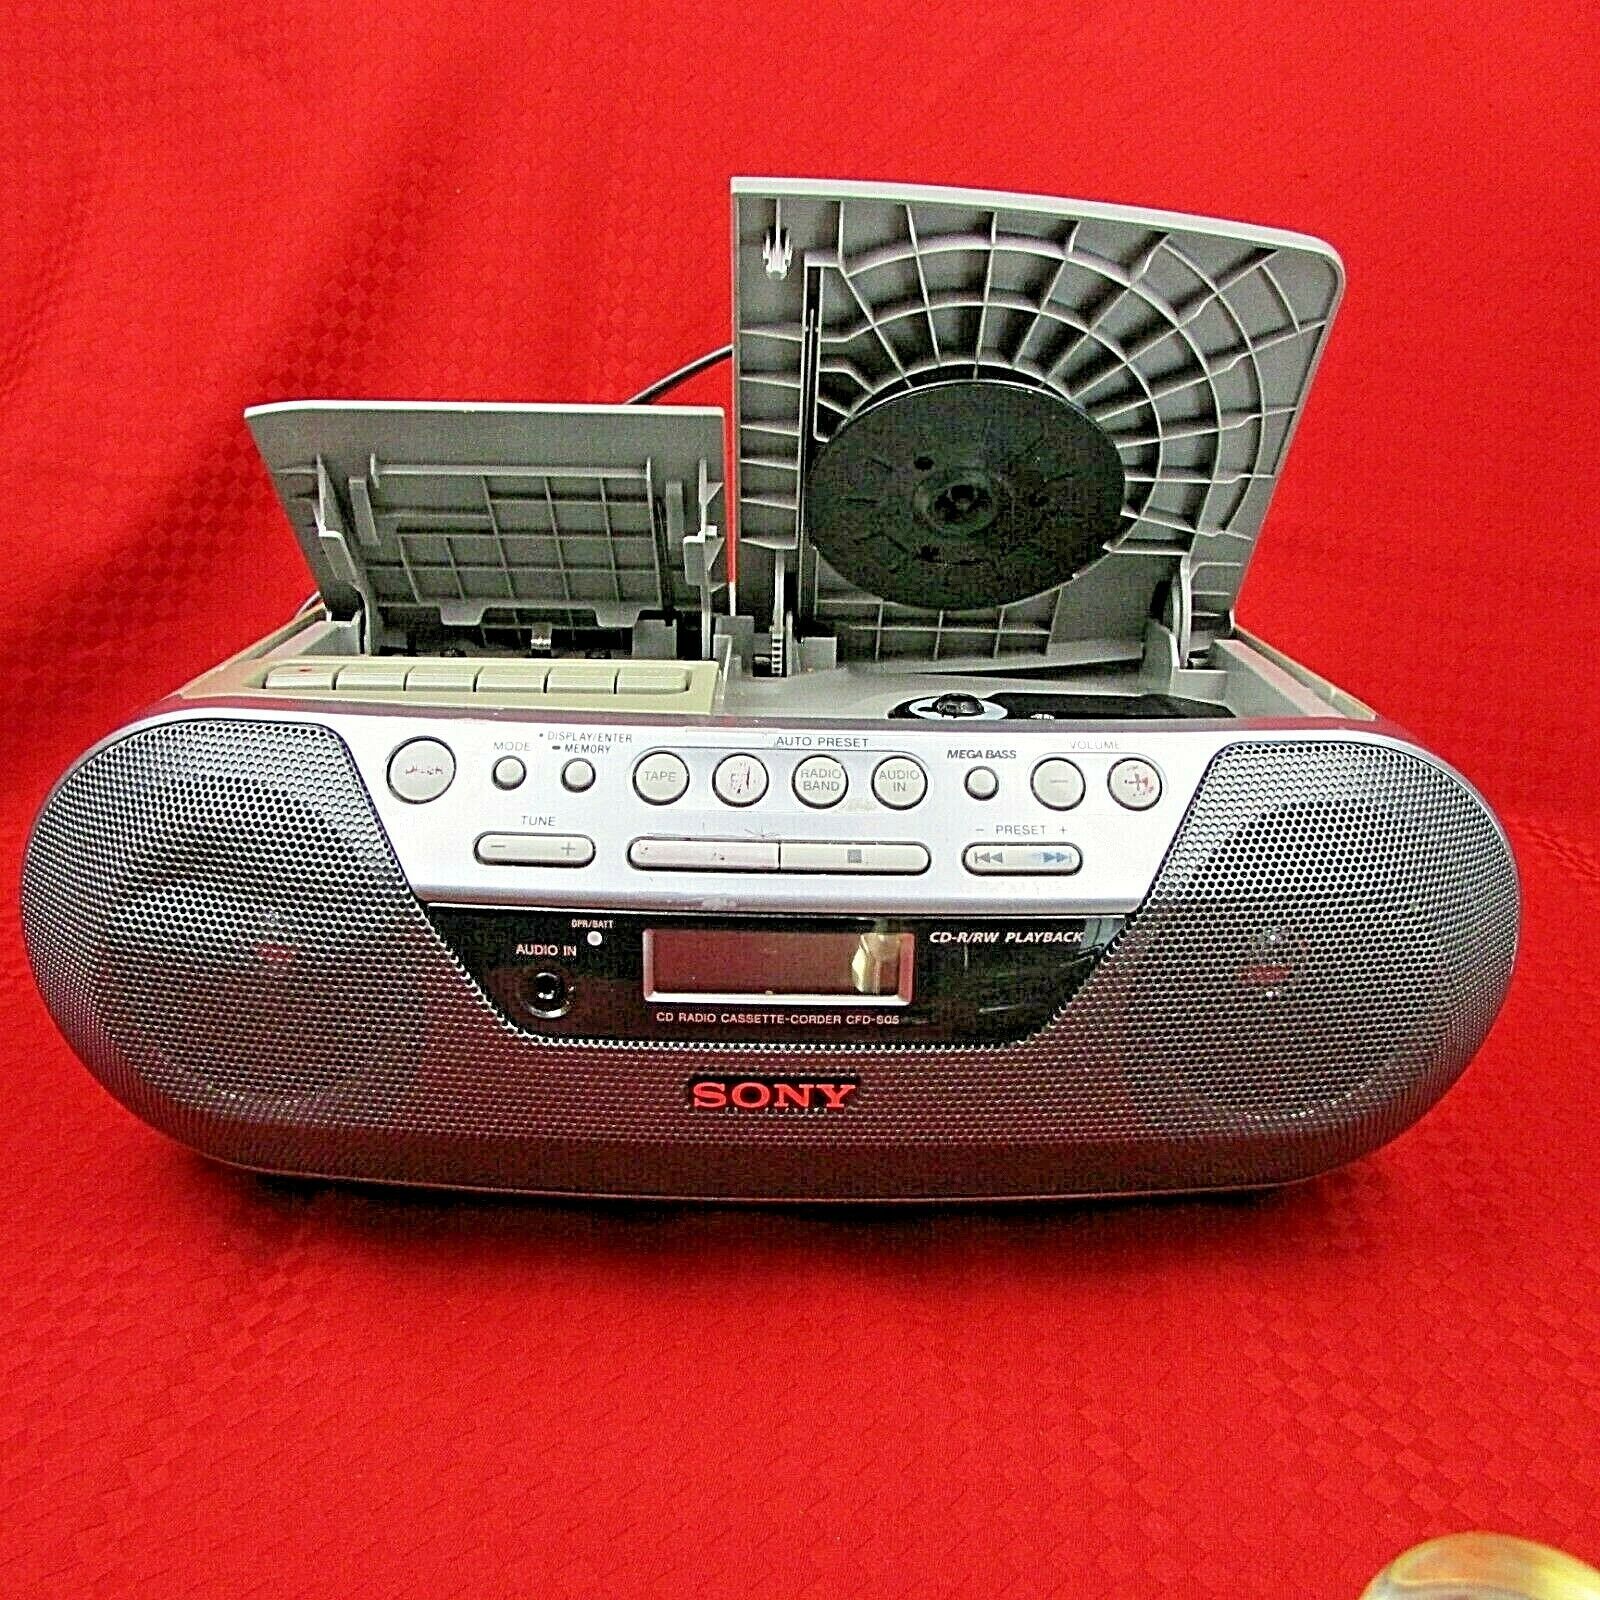 Sony Boombox Cd Player Radio Cassette Rec Cfd S05 Mega Base Boomboxes